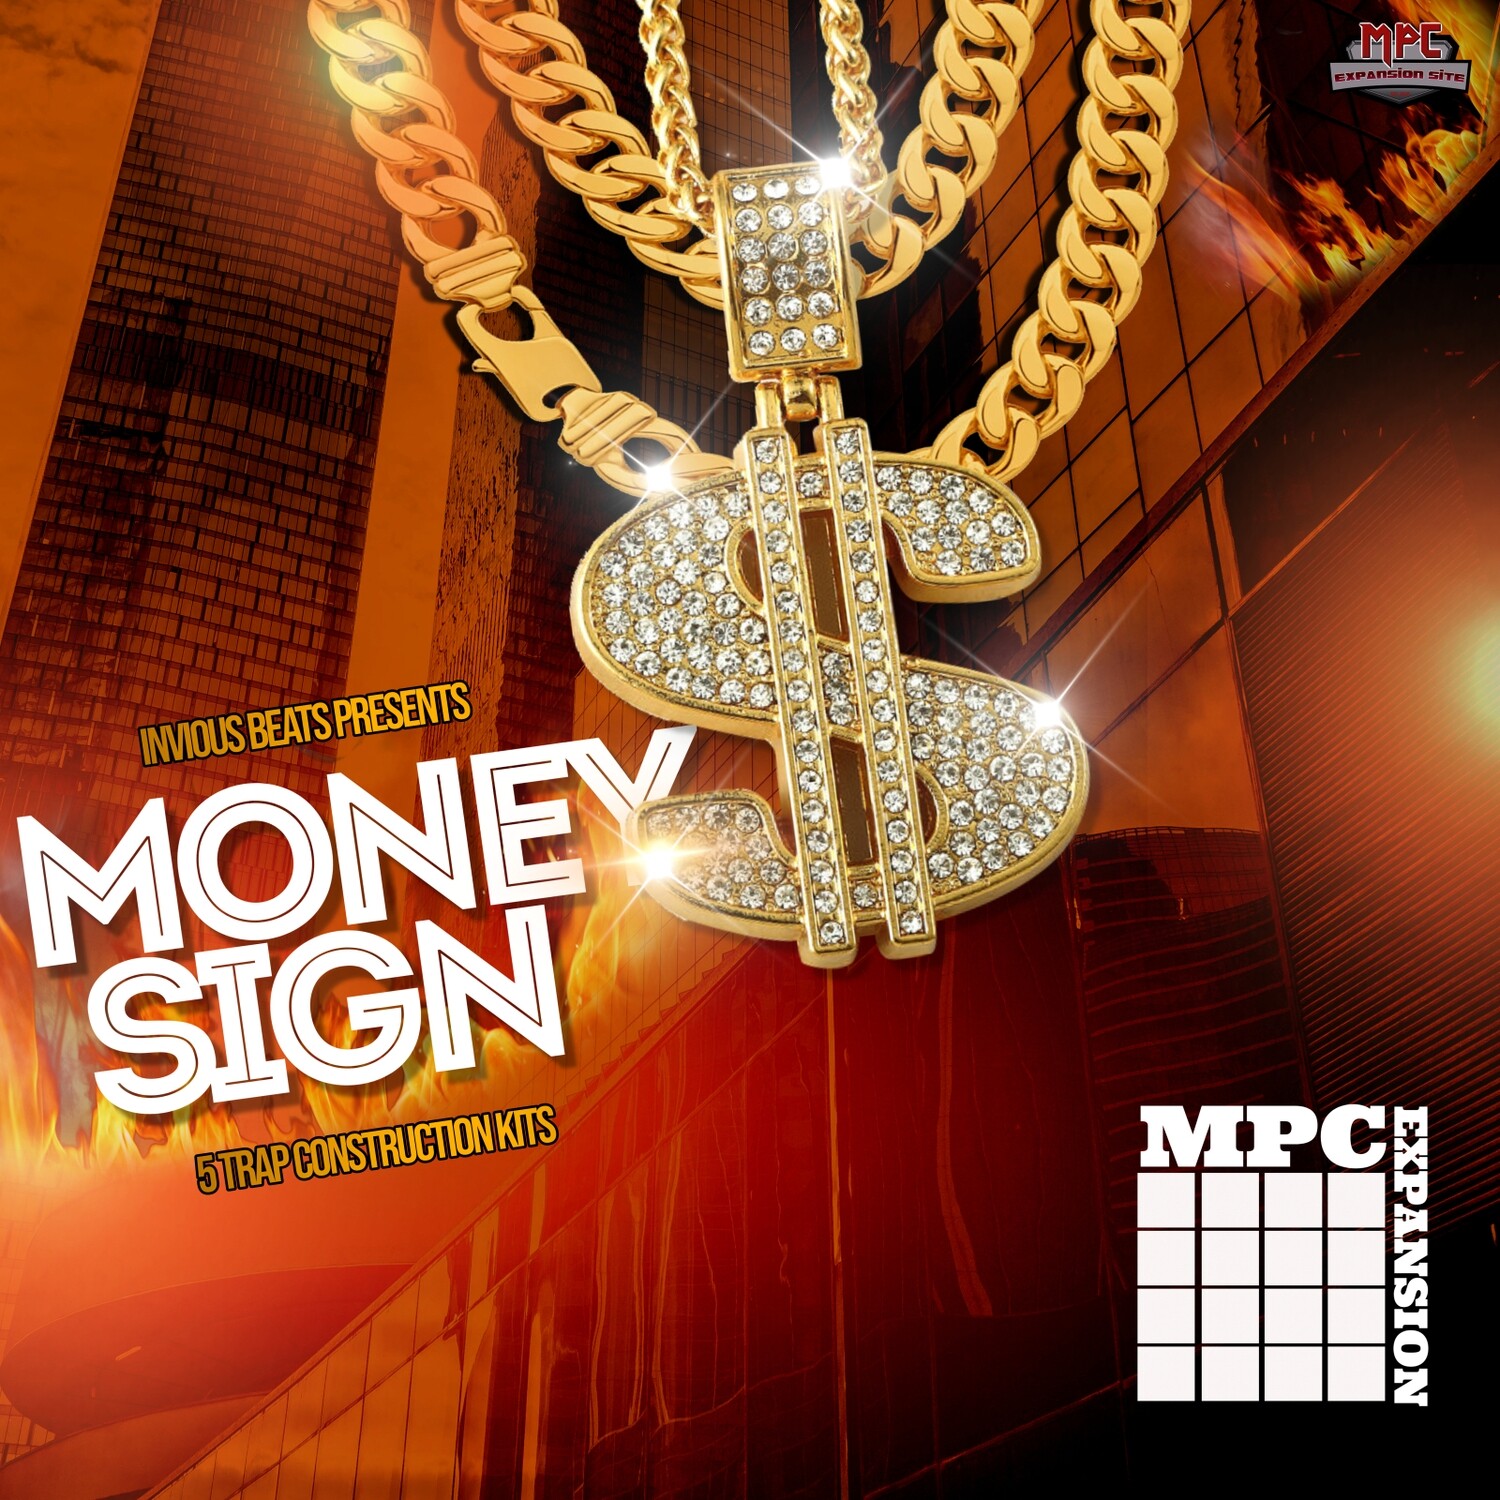 MPC EXPANSION 'MONEY SIGN' by INVIOUS